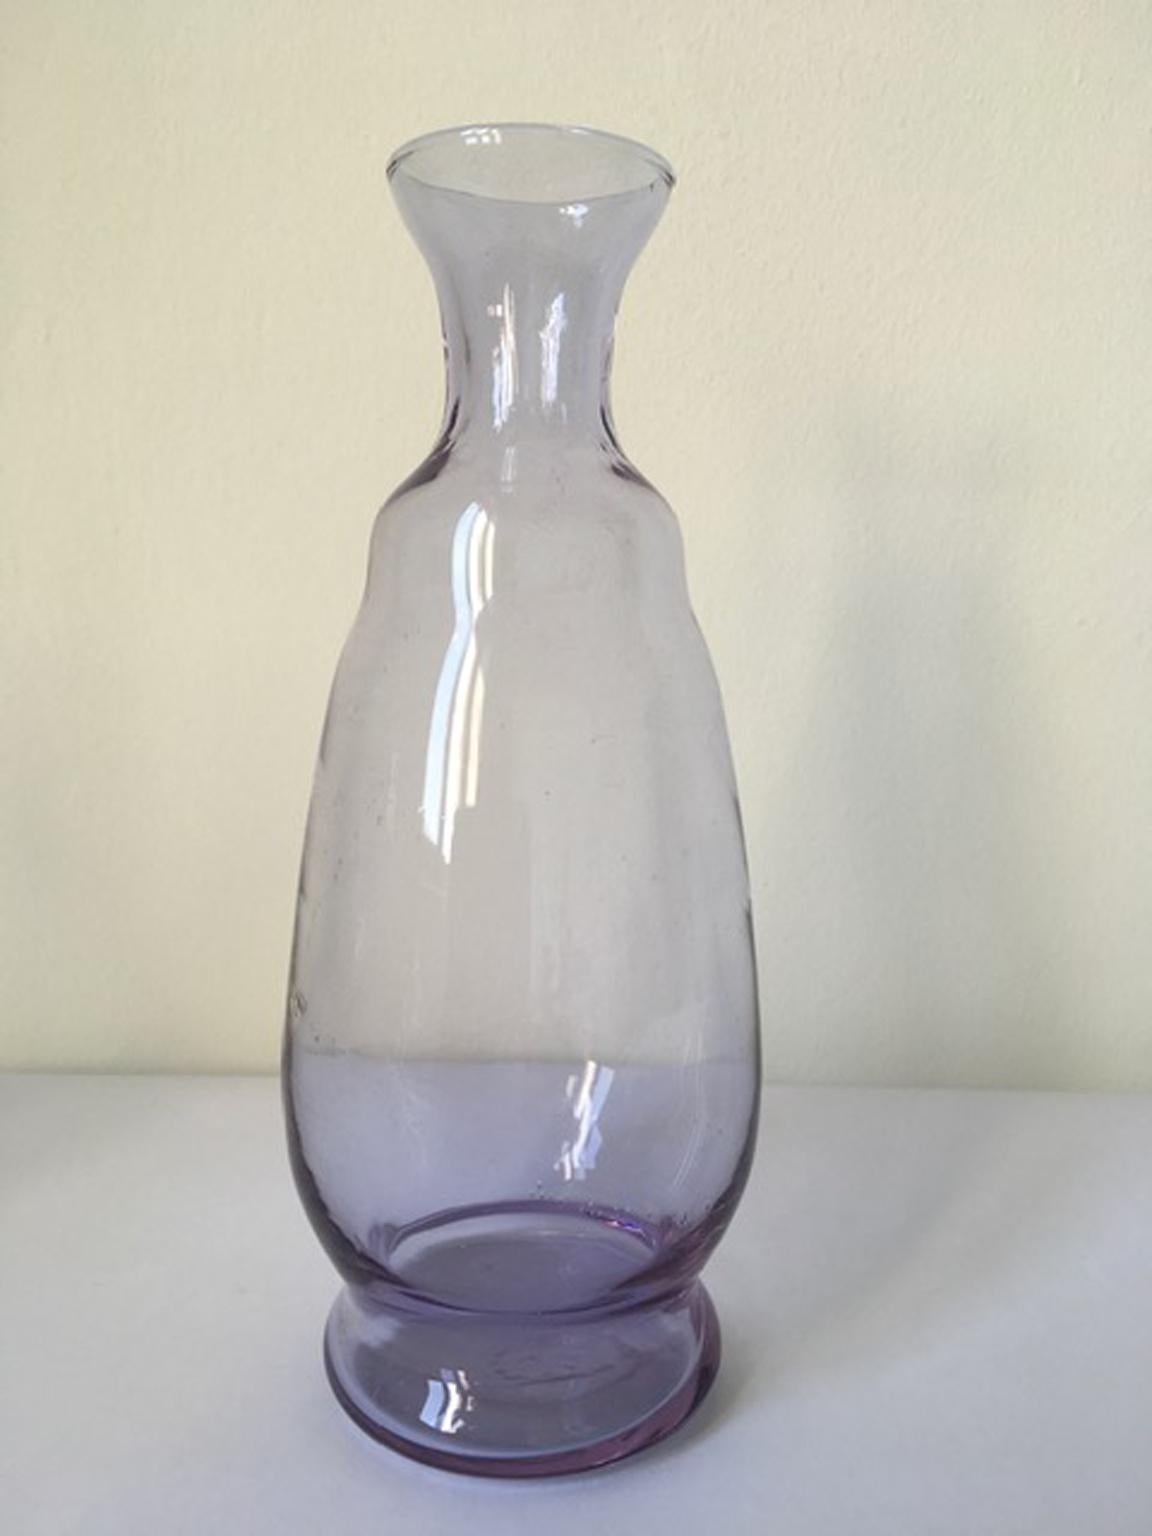 This is a charming and elegant  piece hand made in Murano, Venice, Italy in 1960. 
The blown glass  has a vibrant color, the purple.
This is a piece that will be  part of ypur collection, or can be put on your diary table

The piece will be